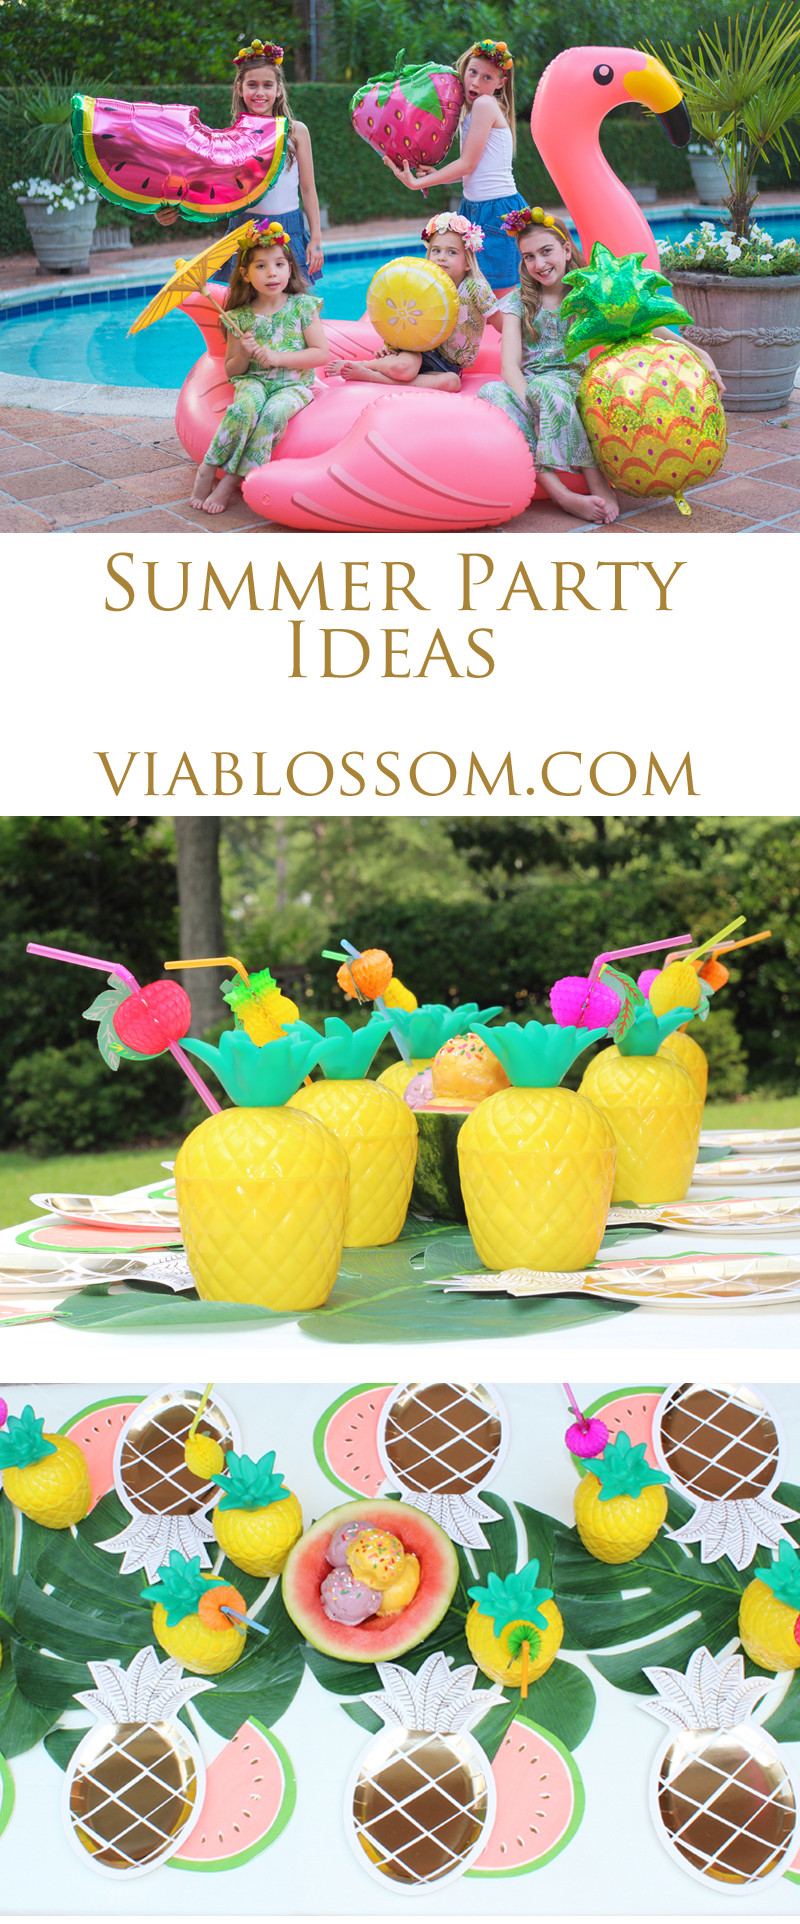 Summer Party Favor Ideas
 Must Have Summer Party Supplies Via Blossom